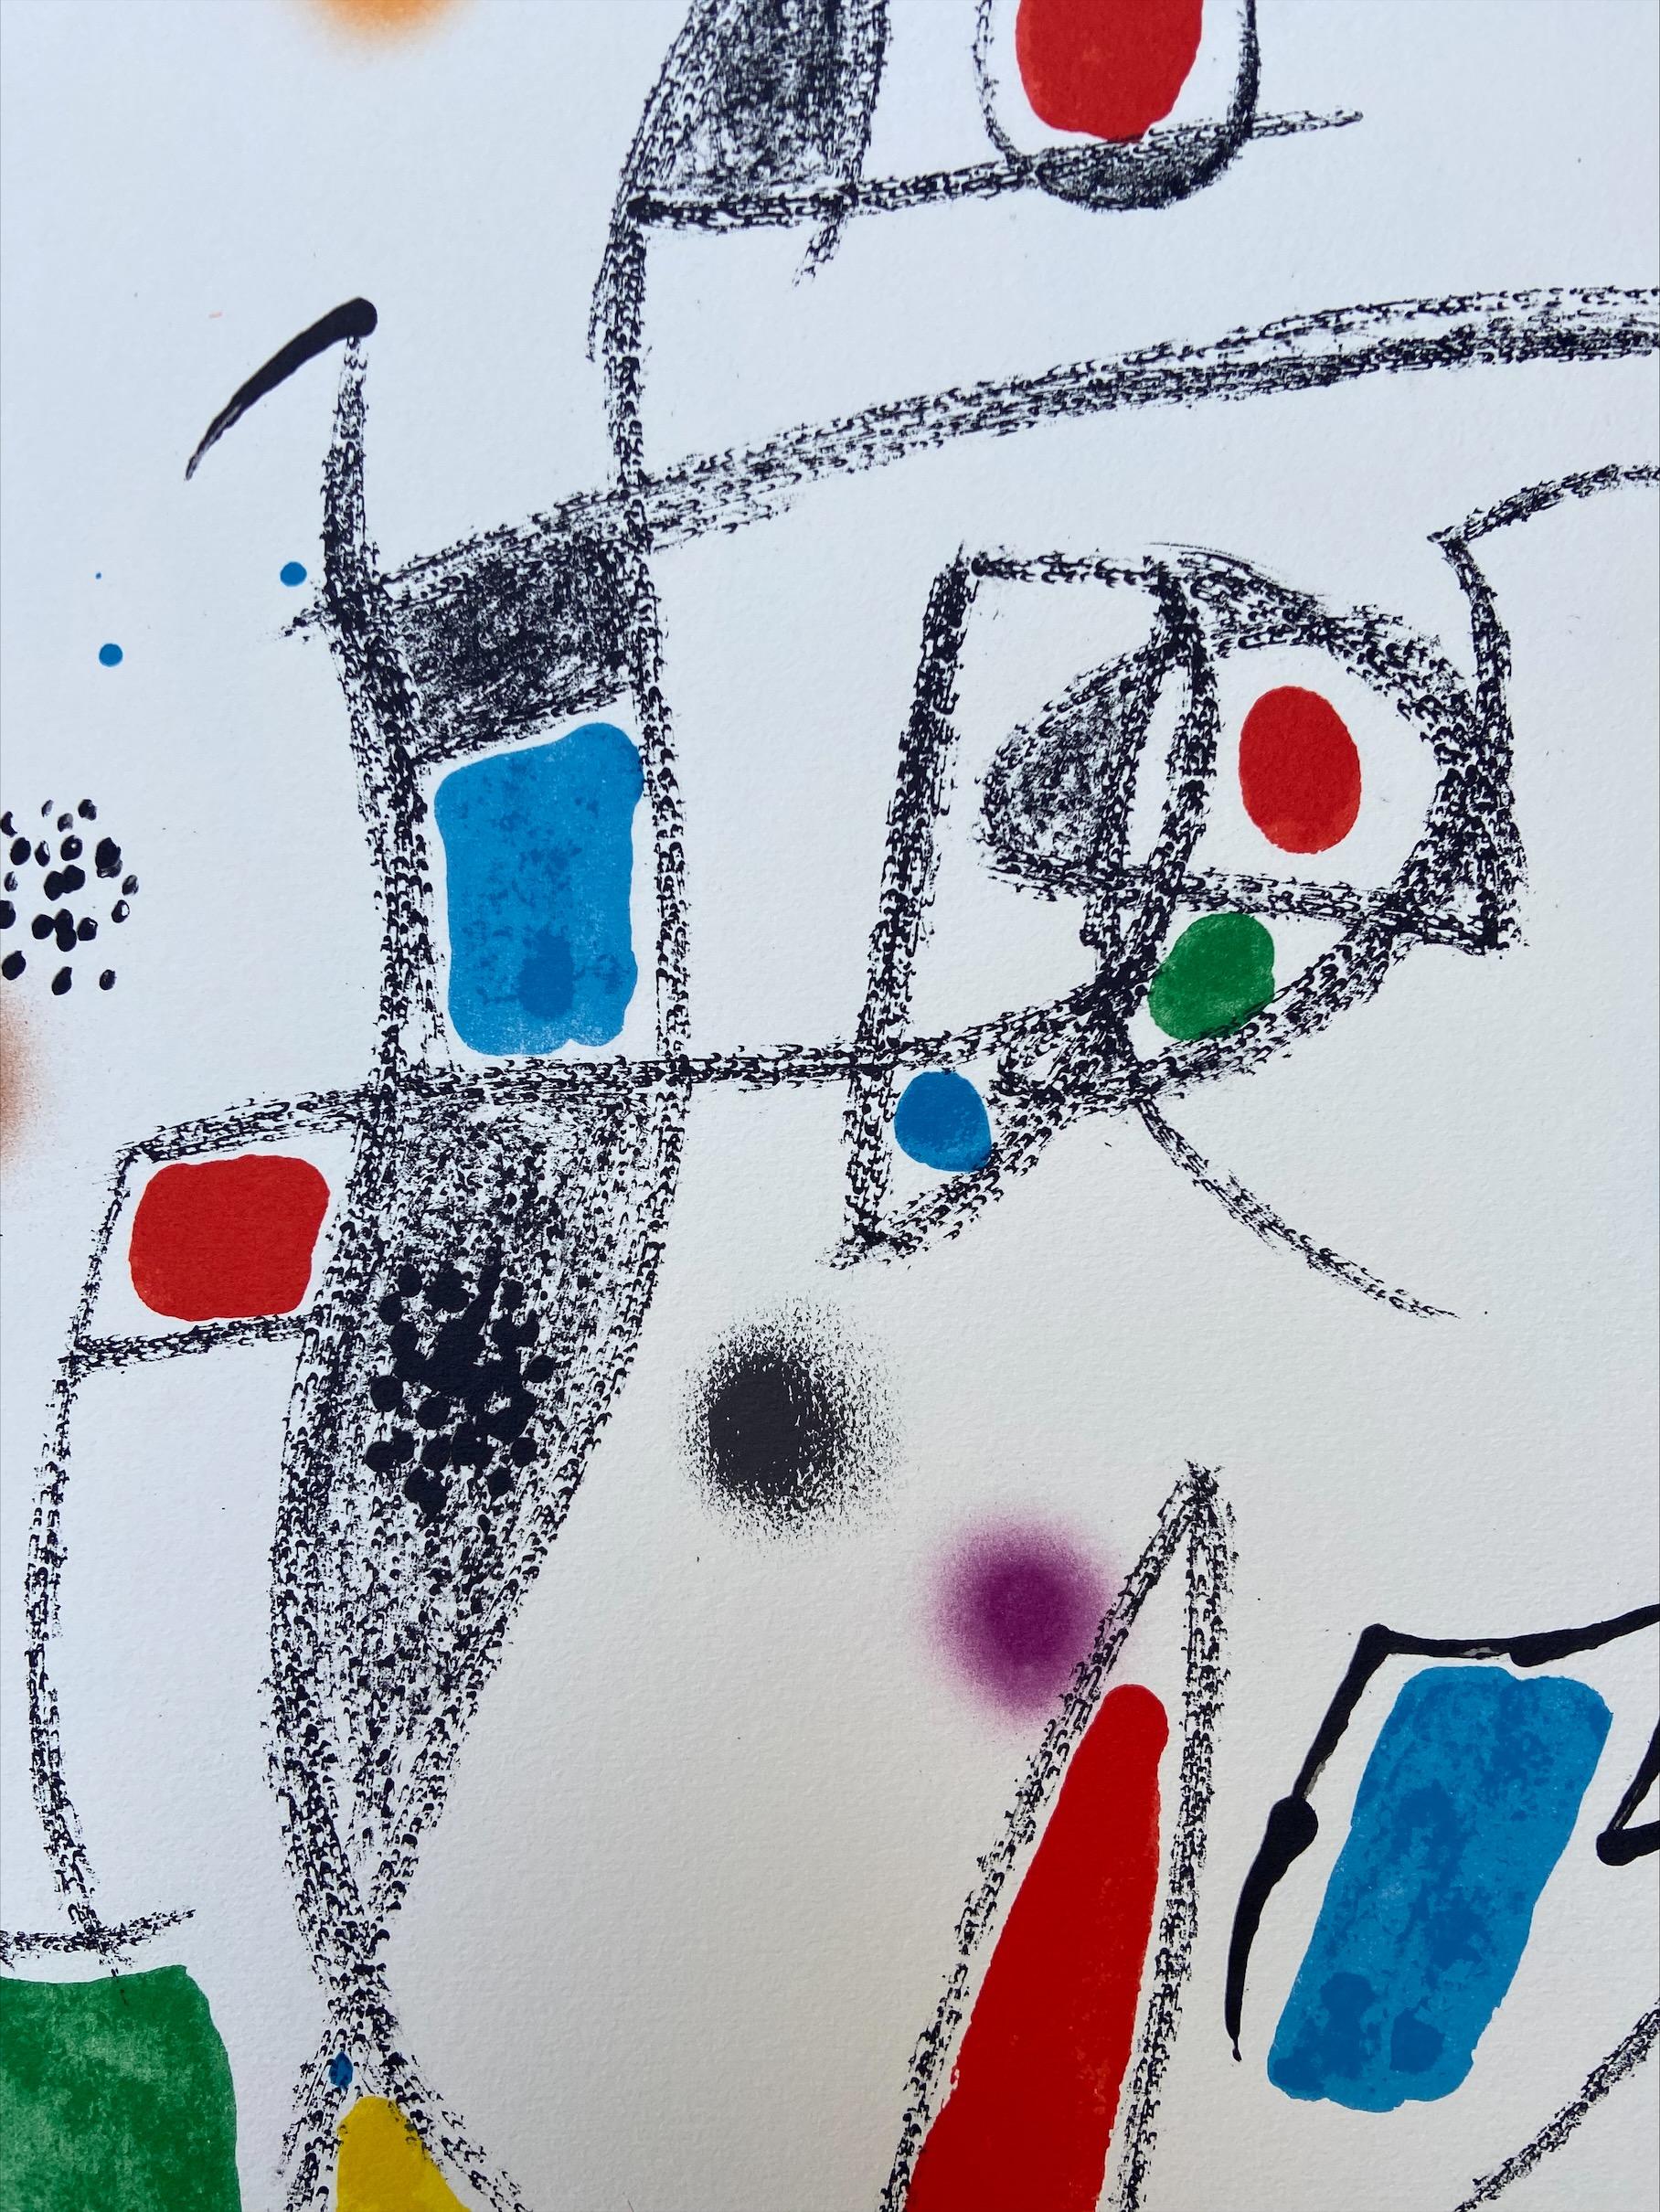 Joan Miró - Maravillas con variaciones n-10
Lithography 
35,7x49,6cm
Signed in the plate 
1975
Edition of 1500 copies on Guarro paper
Publisher : Poligrafa Barcelona 
890€